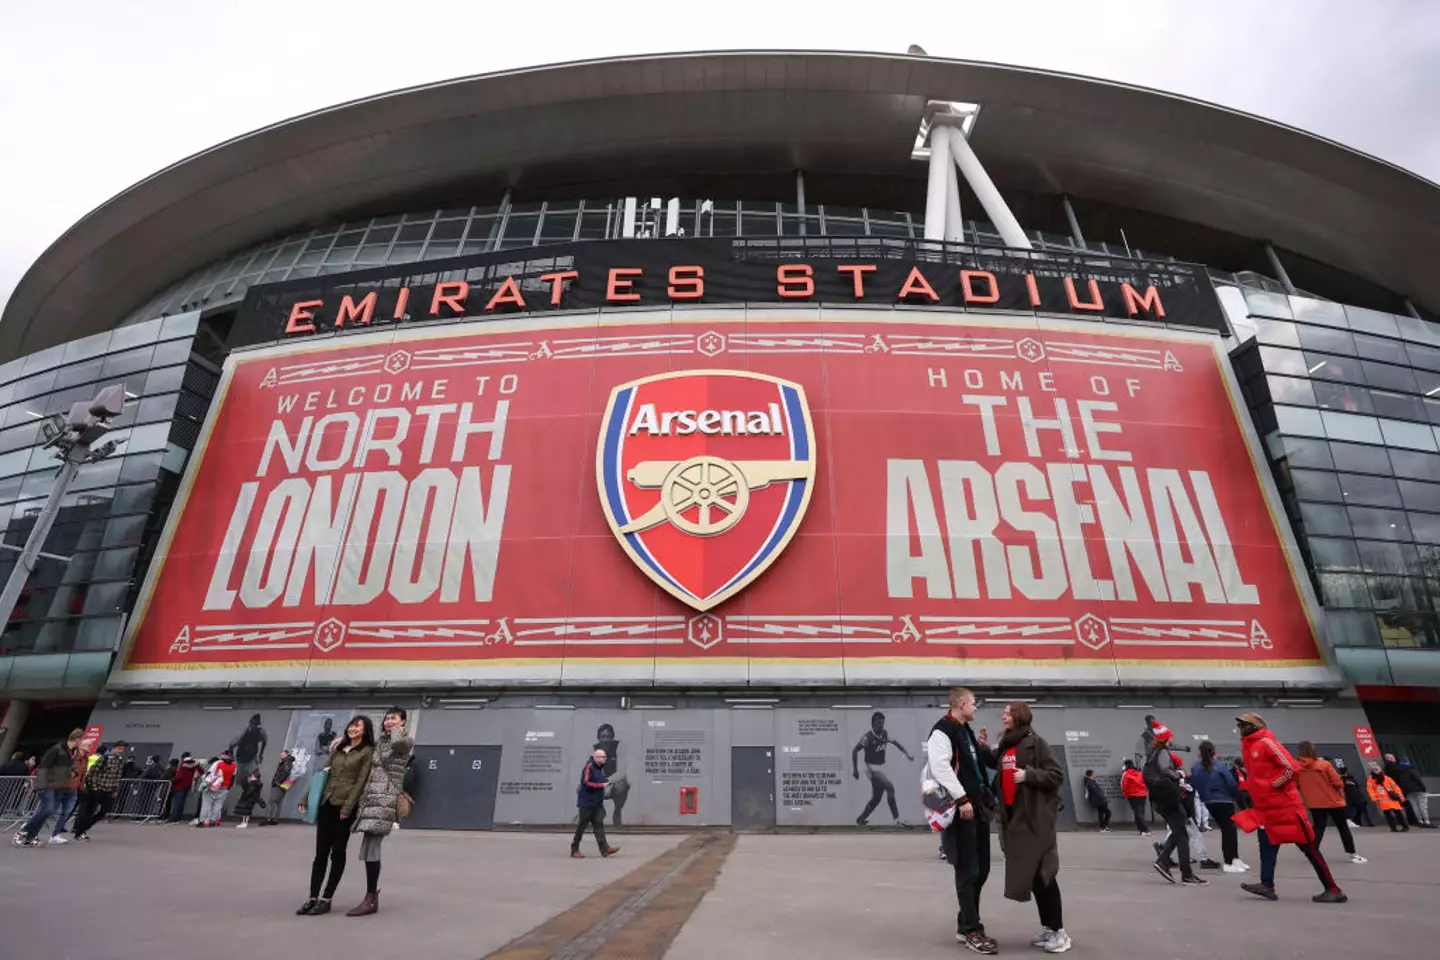 The Emirates will use a different name on Tuesday night (Image: Alamy)